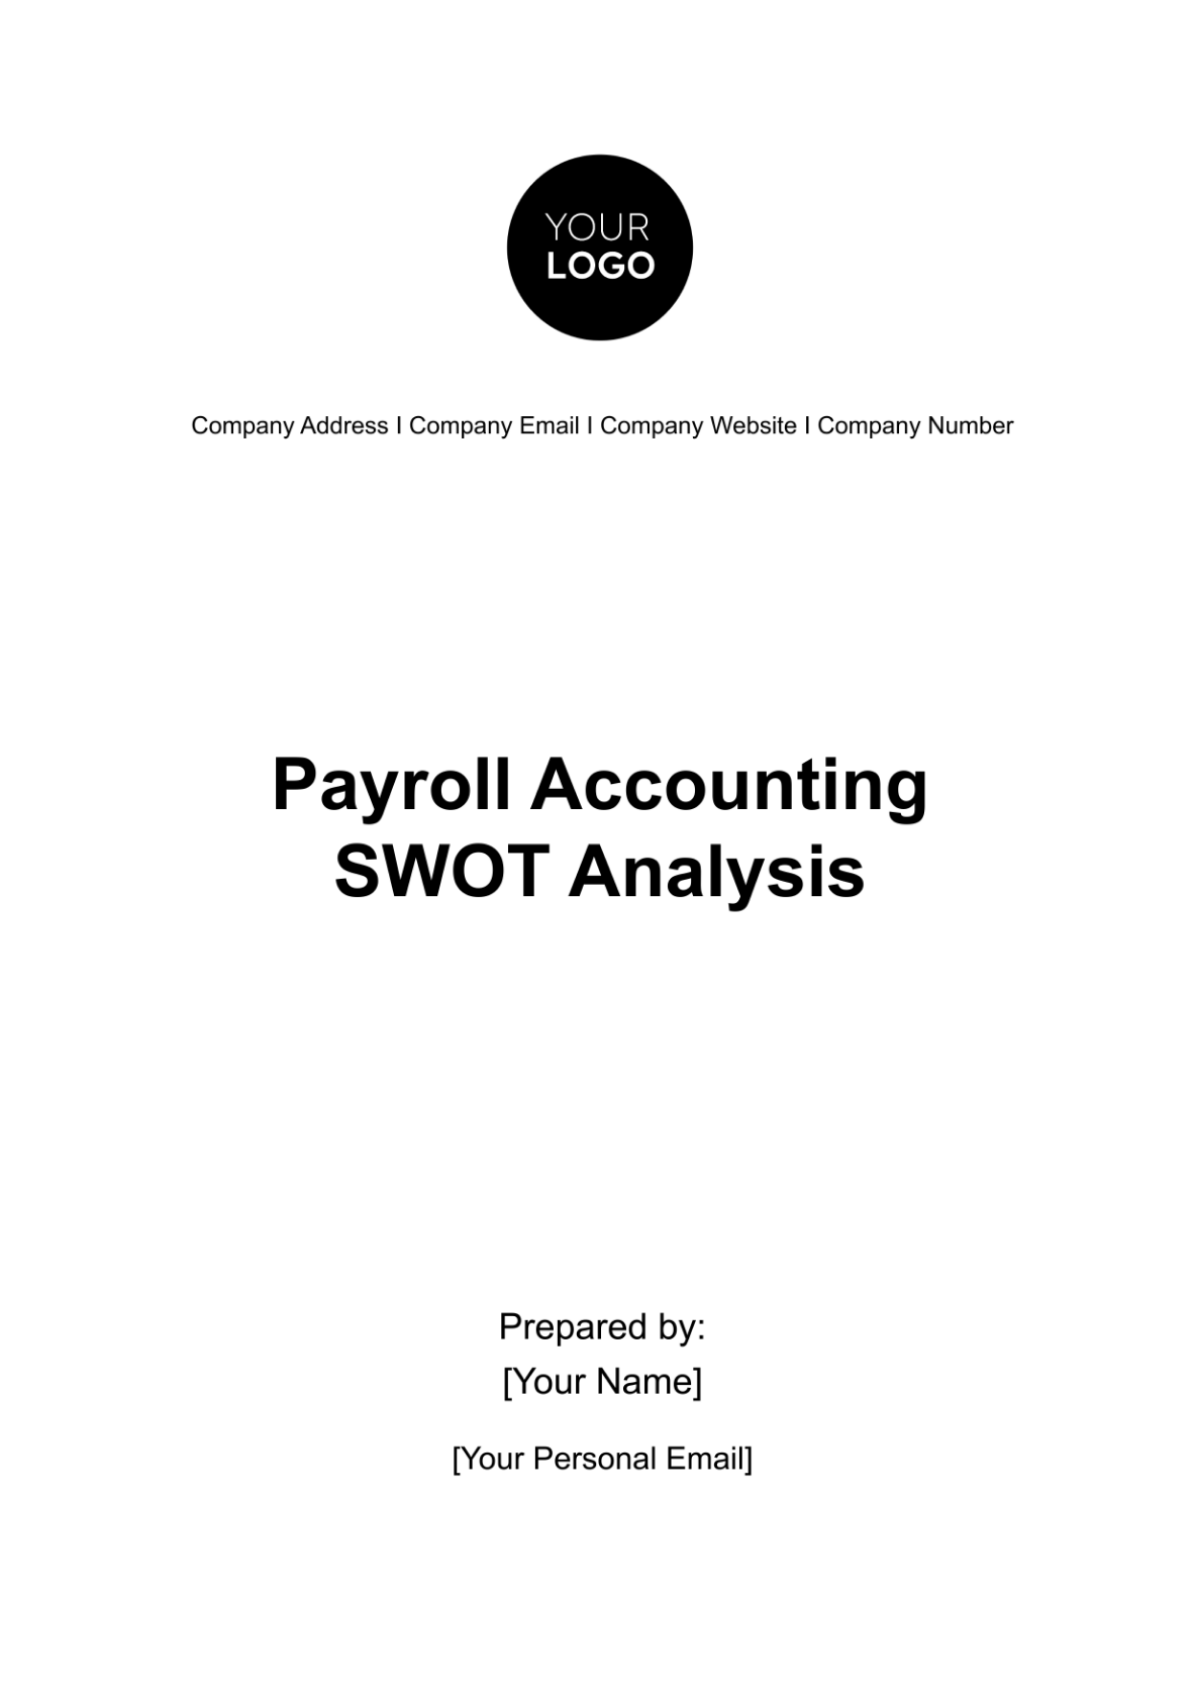 Free Payroll Accounting SWOT Analysis Template